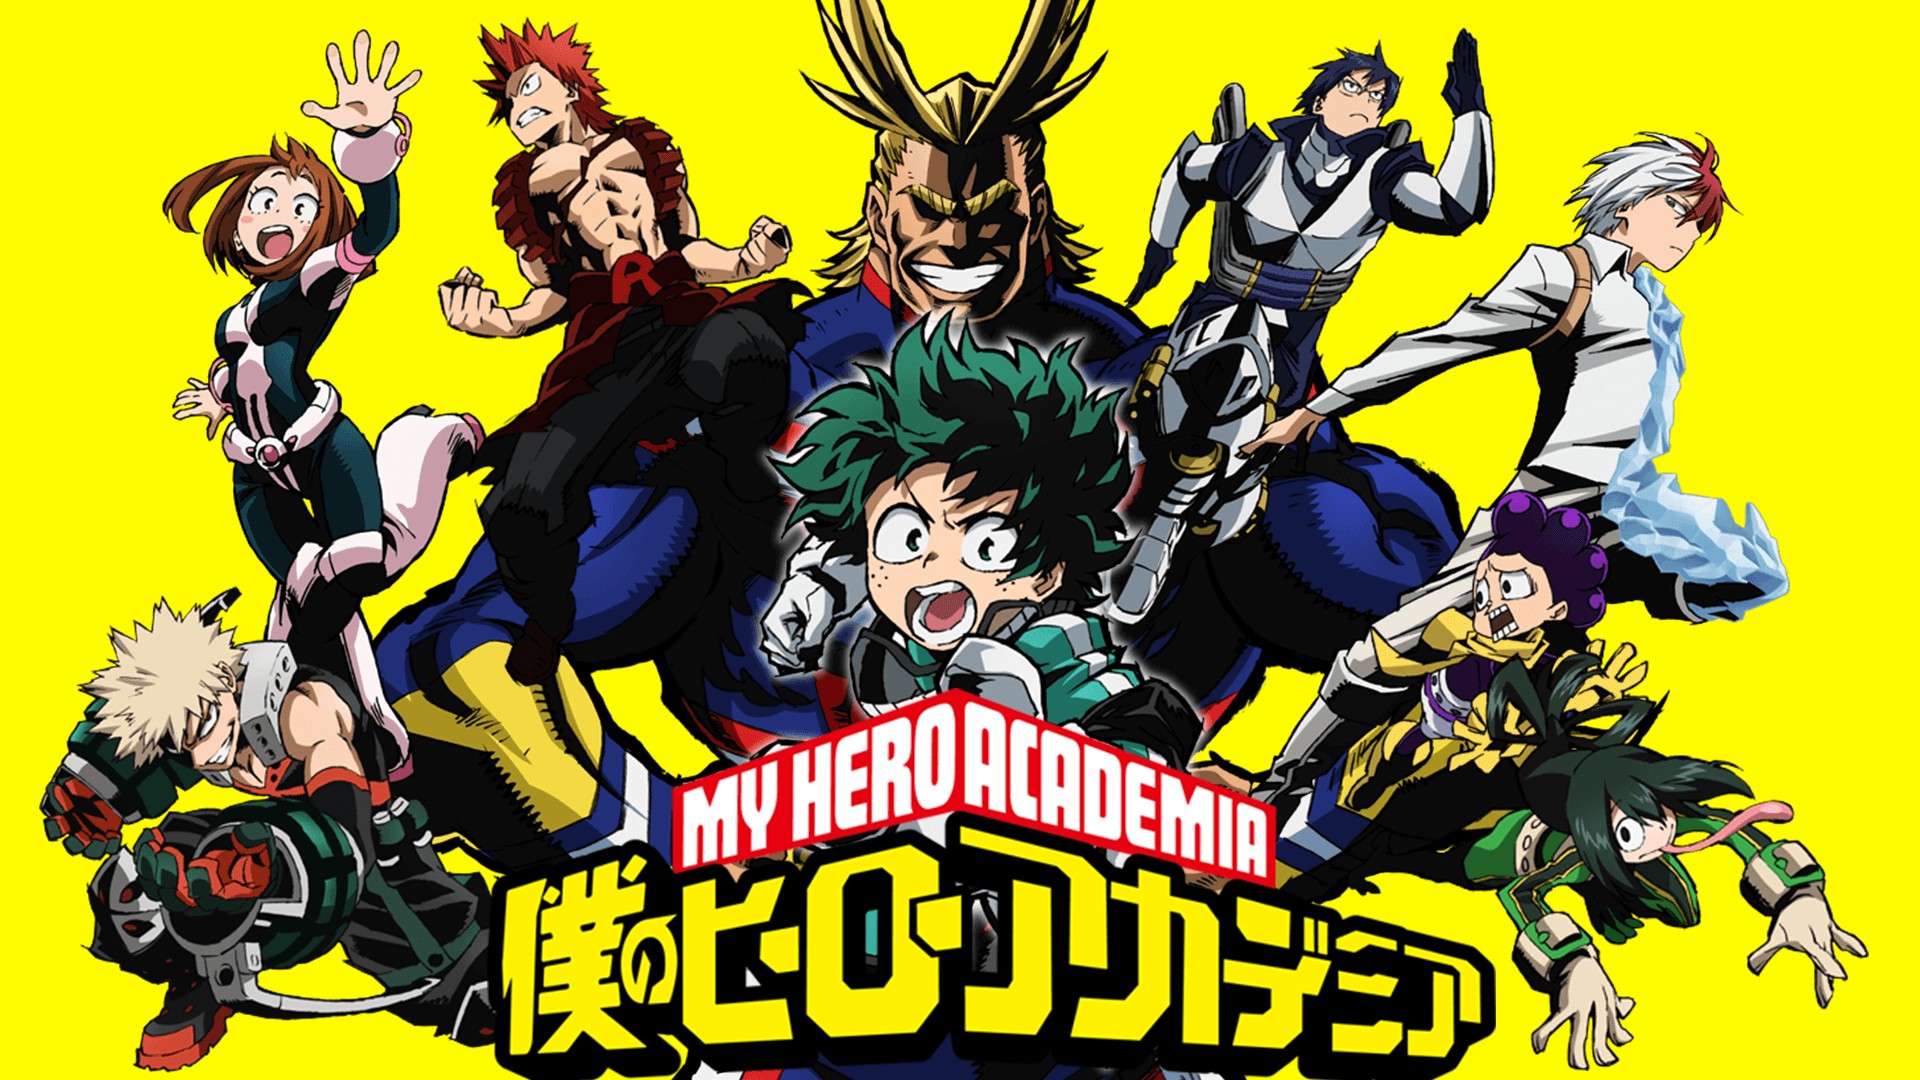 My Hero Academia Wallpaper with high-resolution 1920x1080 pixel. You can use this poster wallpaper for your Desktop Computers, Mac Screensavers, Windows Backgrounds, iPhone Wallpapers, Tablet or Android Lock screen and another Mobile device